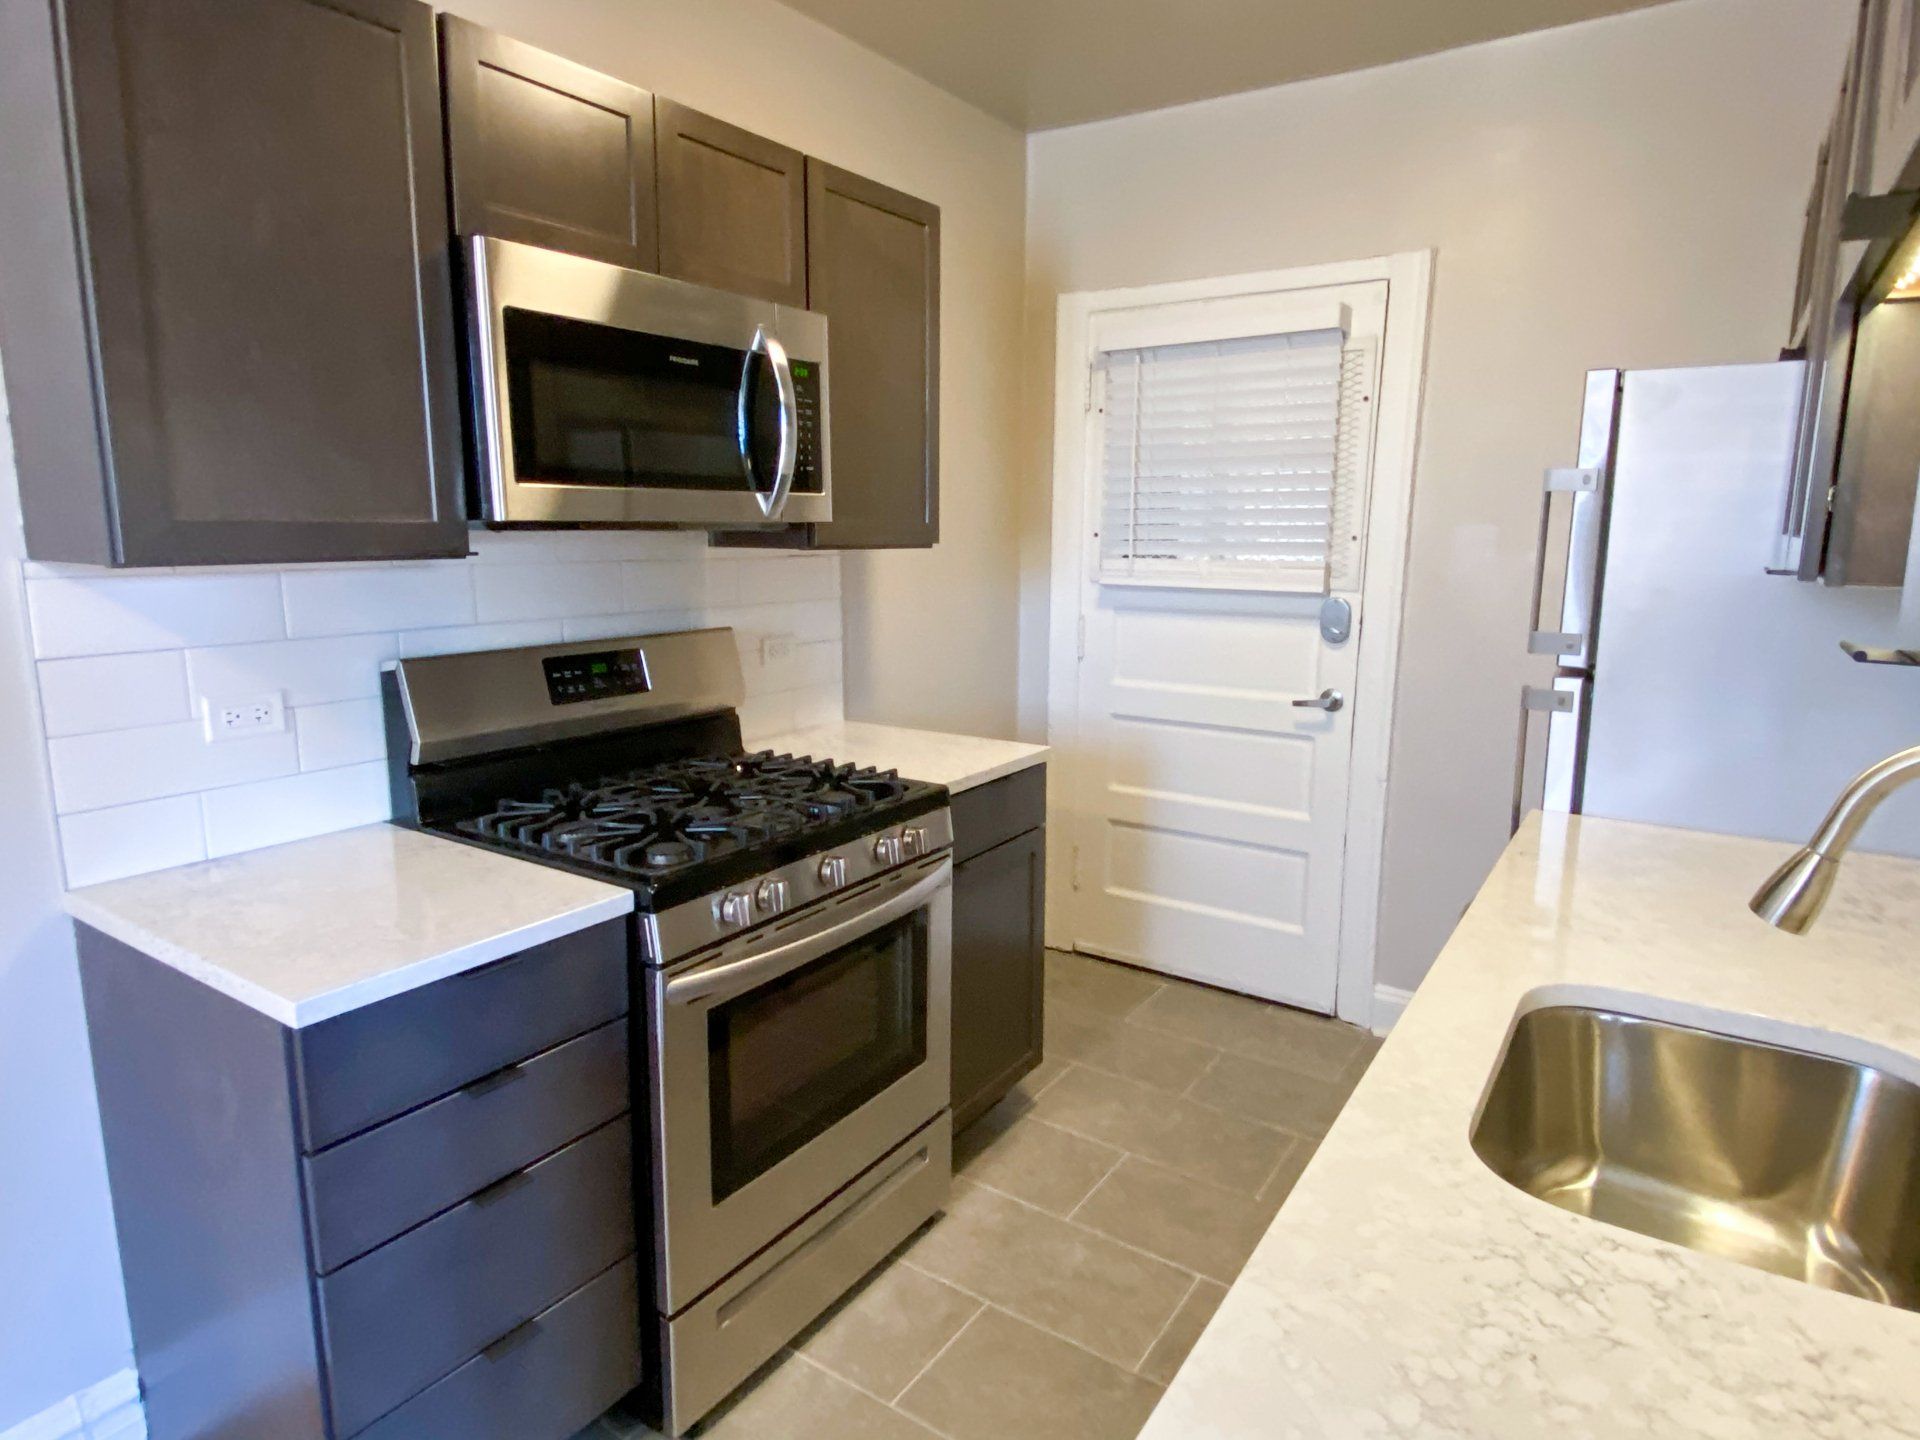 Modern kitchen with stainless steel appliances and a sink at Reside at 849.